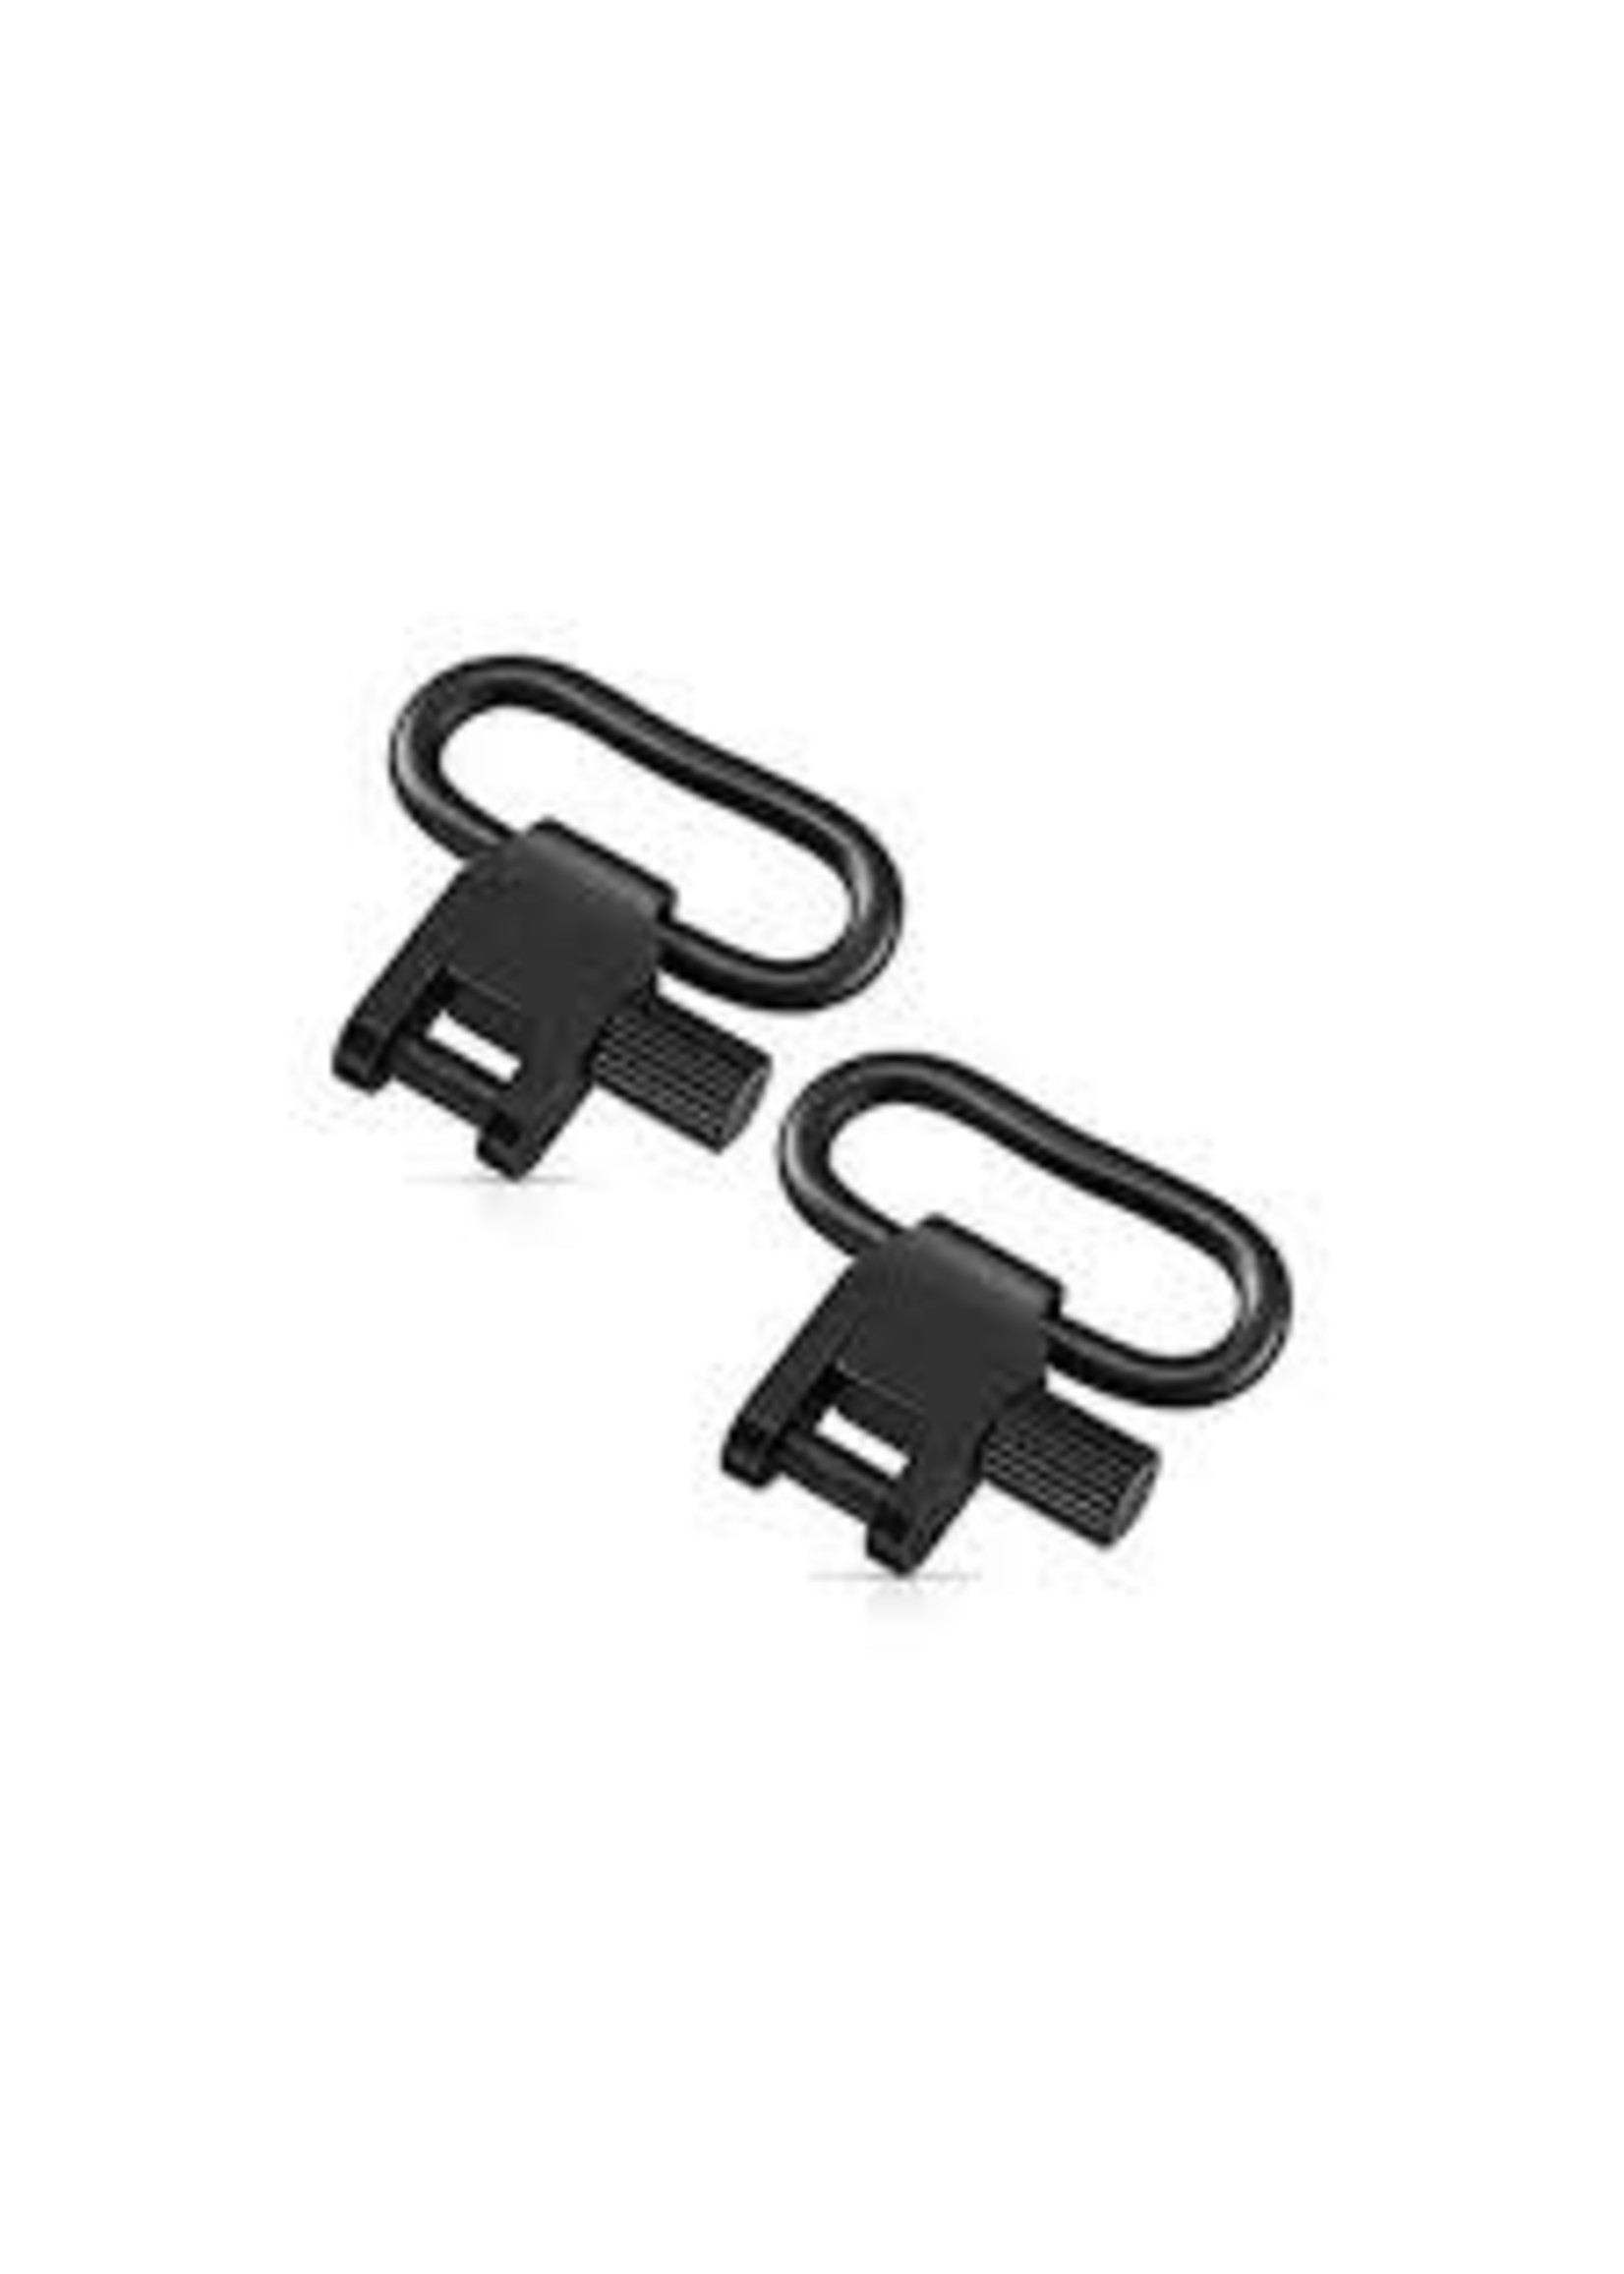 HQ OUTFITTERS HQ OUTFITTERS 1.25" QUICK DETACH SLING SWIVEL SET